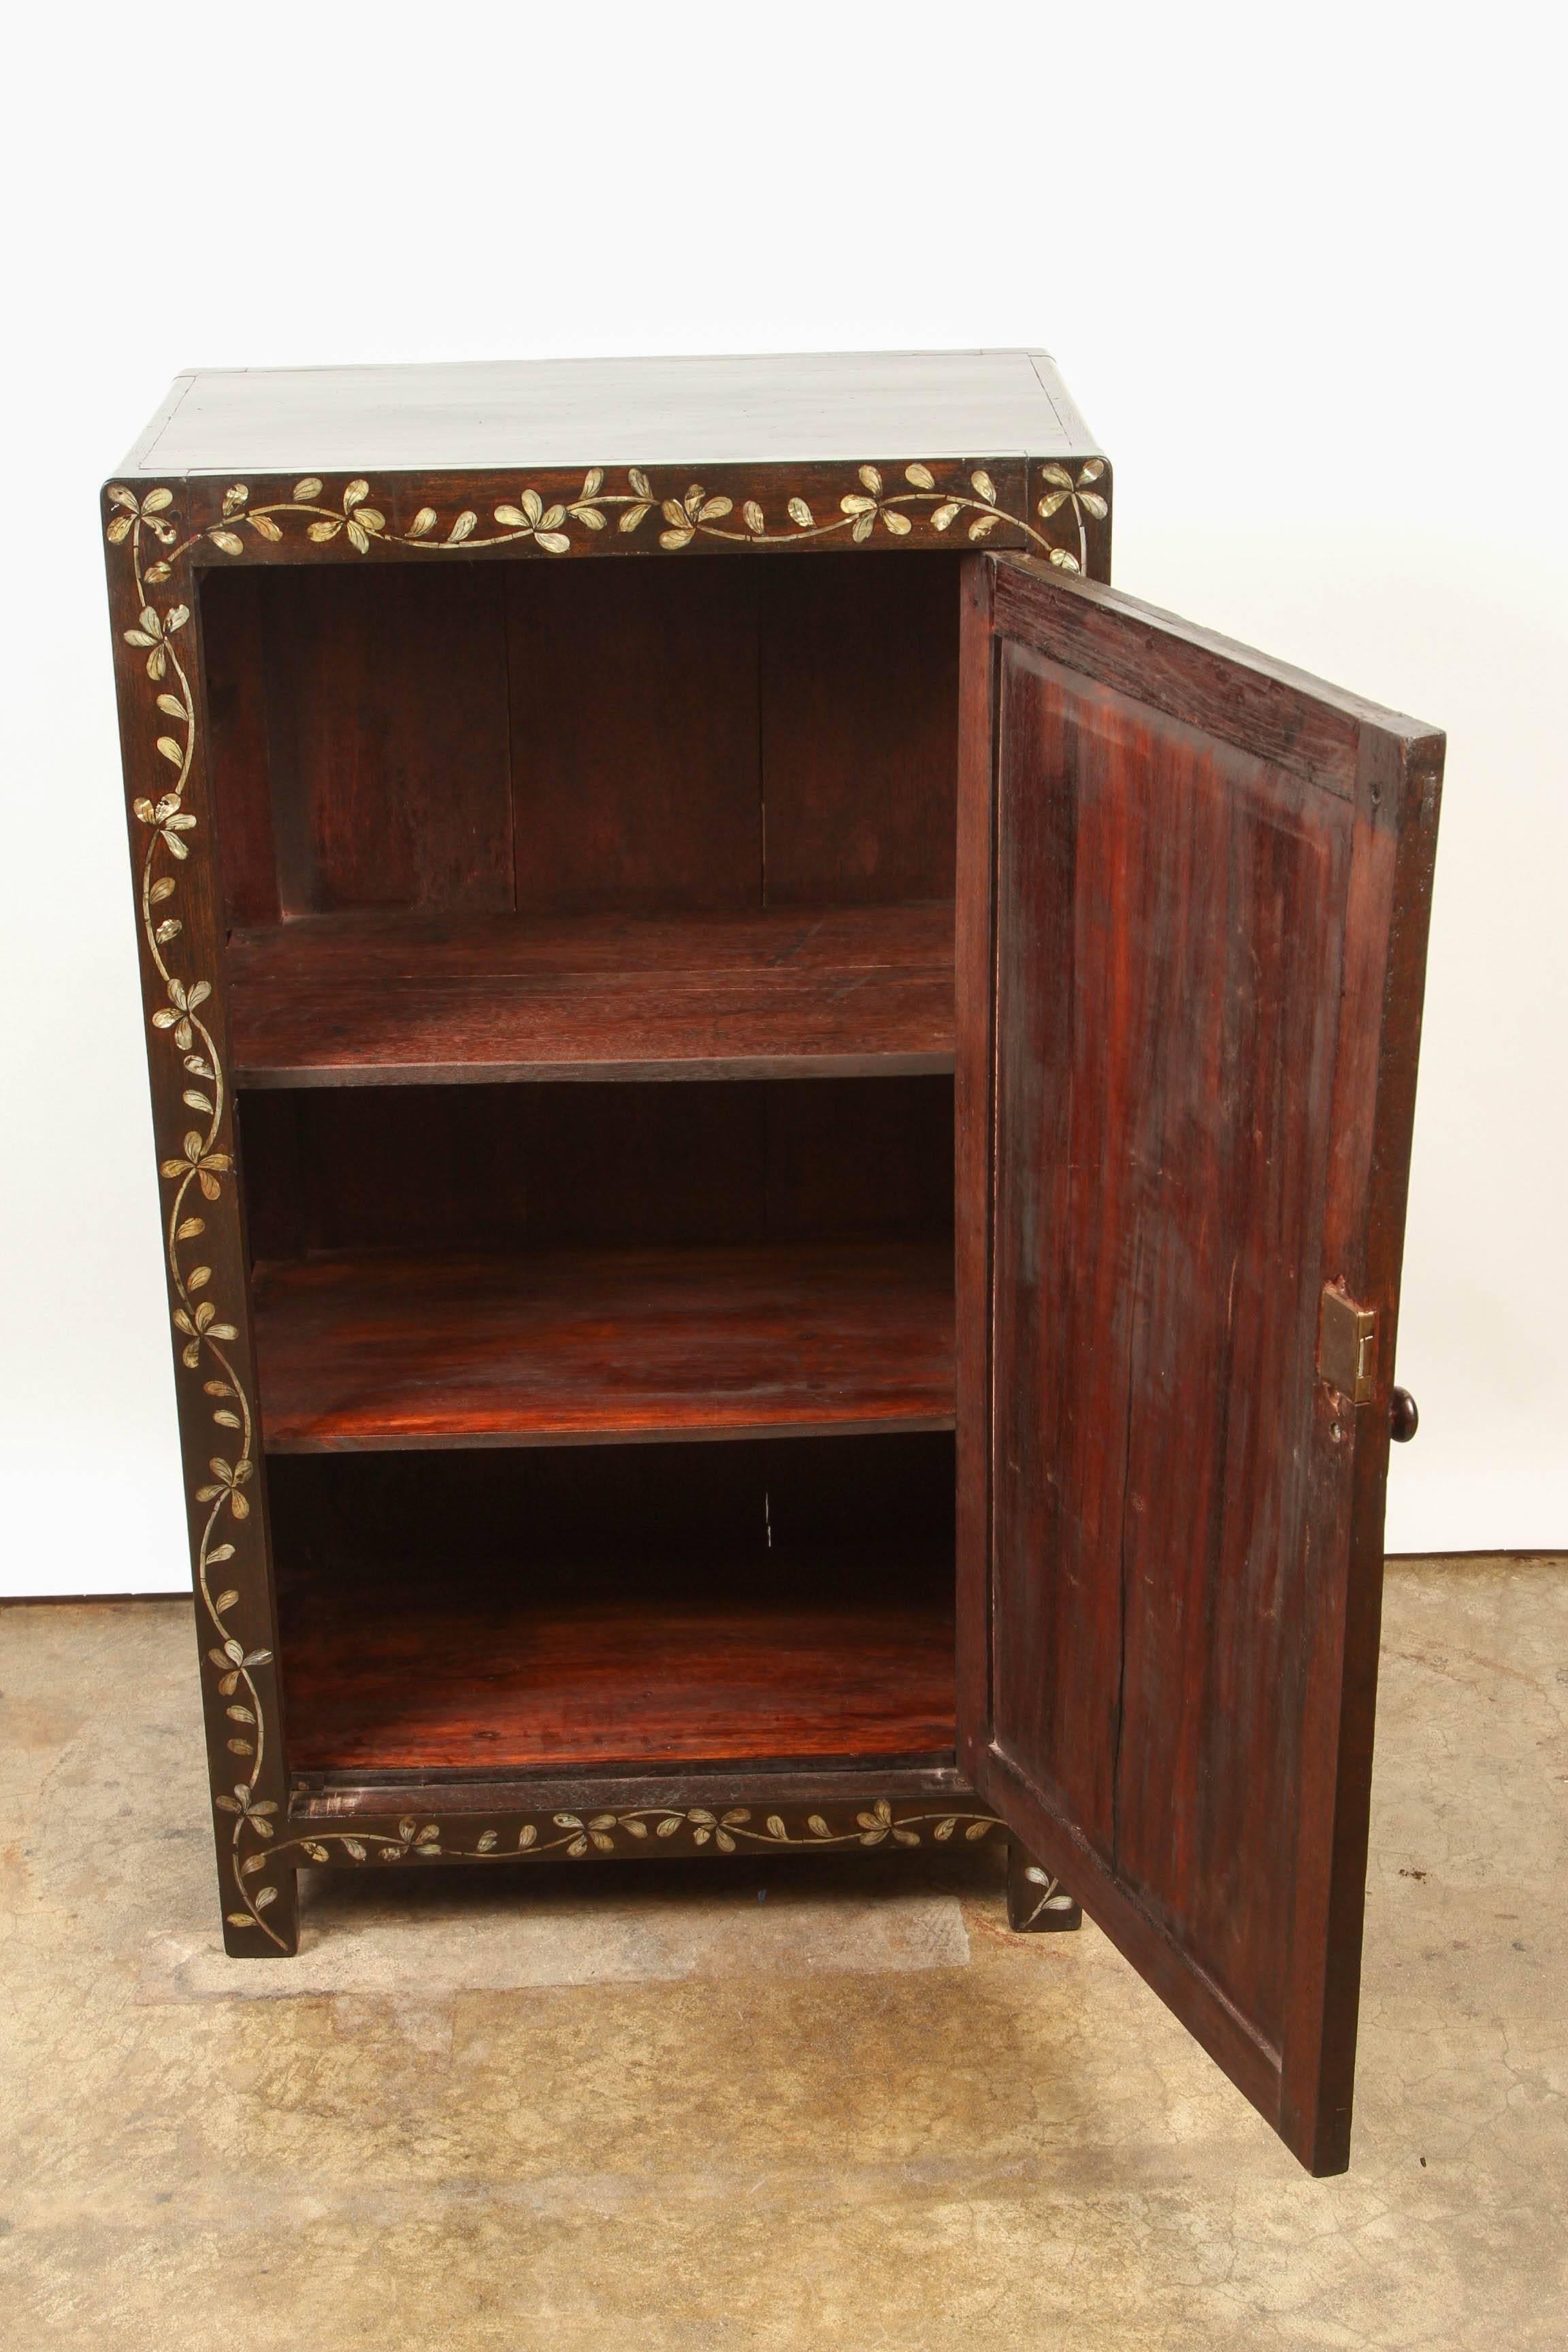 20th Century French Colonial Rosewood and Mother-of-Pearl Inlaid Cabinet